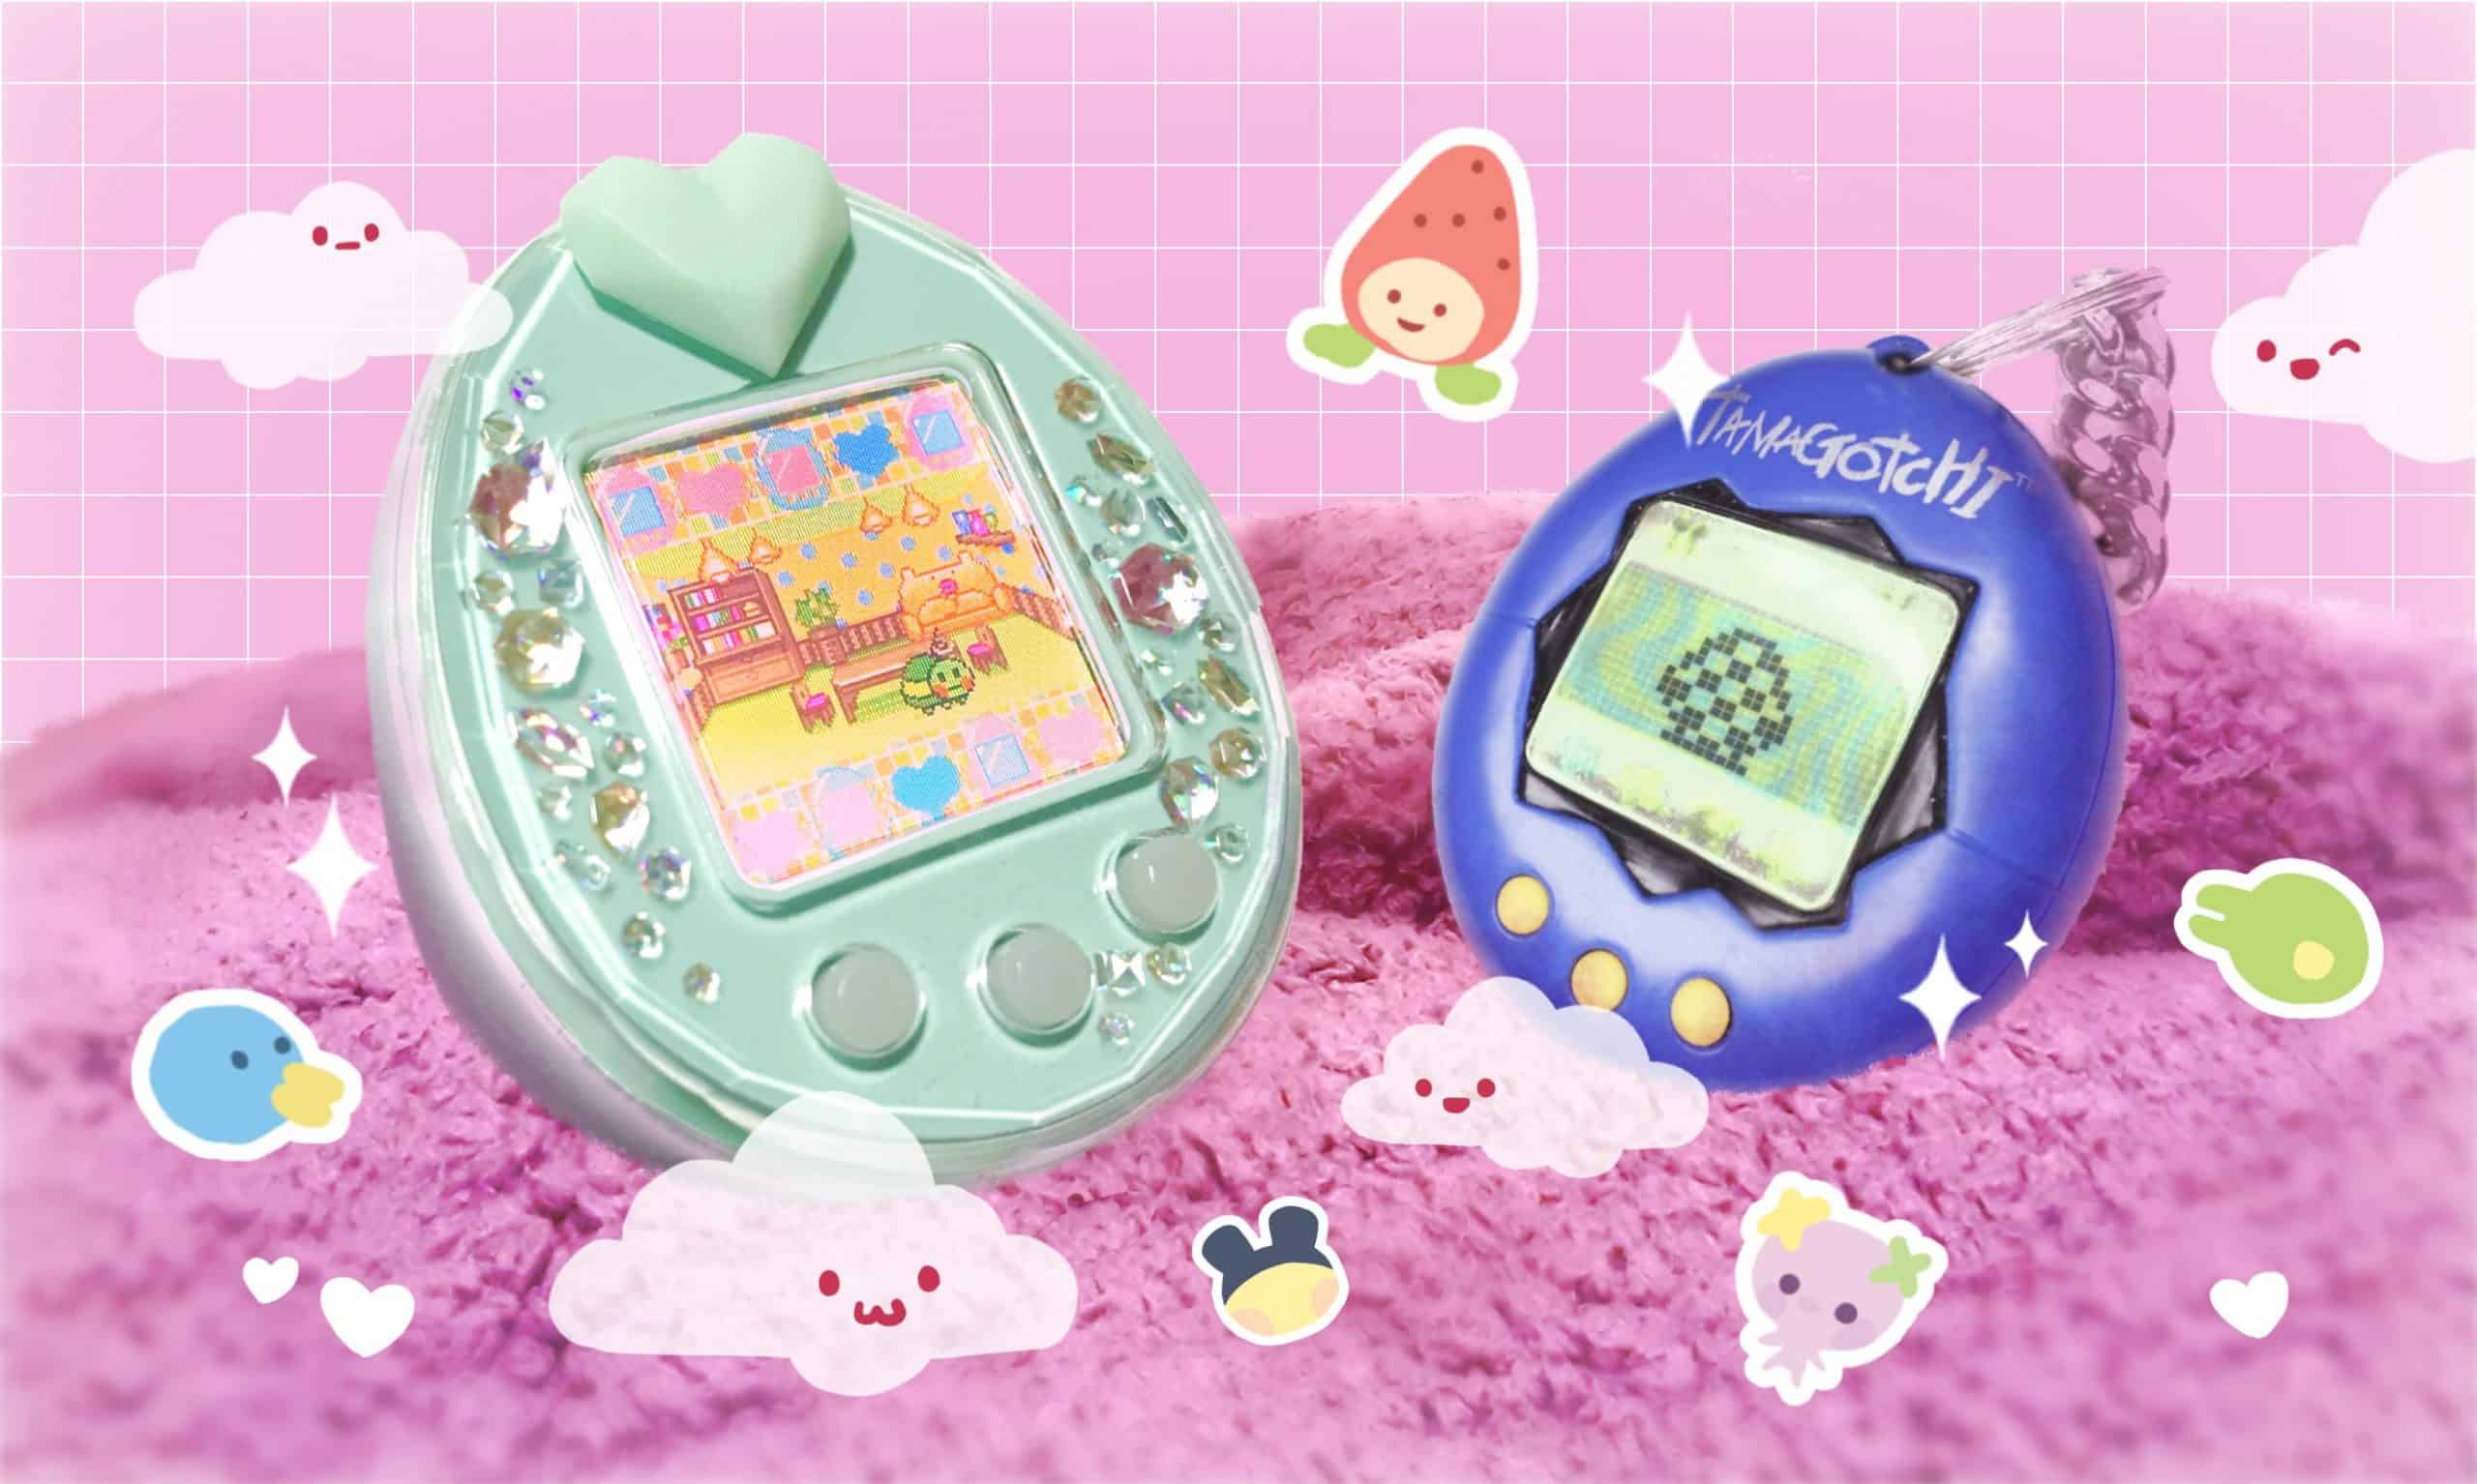 What is a Tamagotchi and why was it so popular?